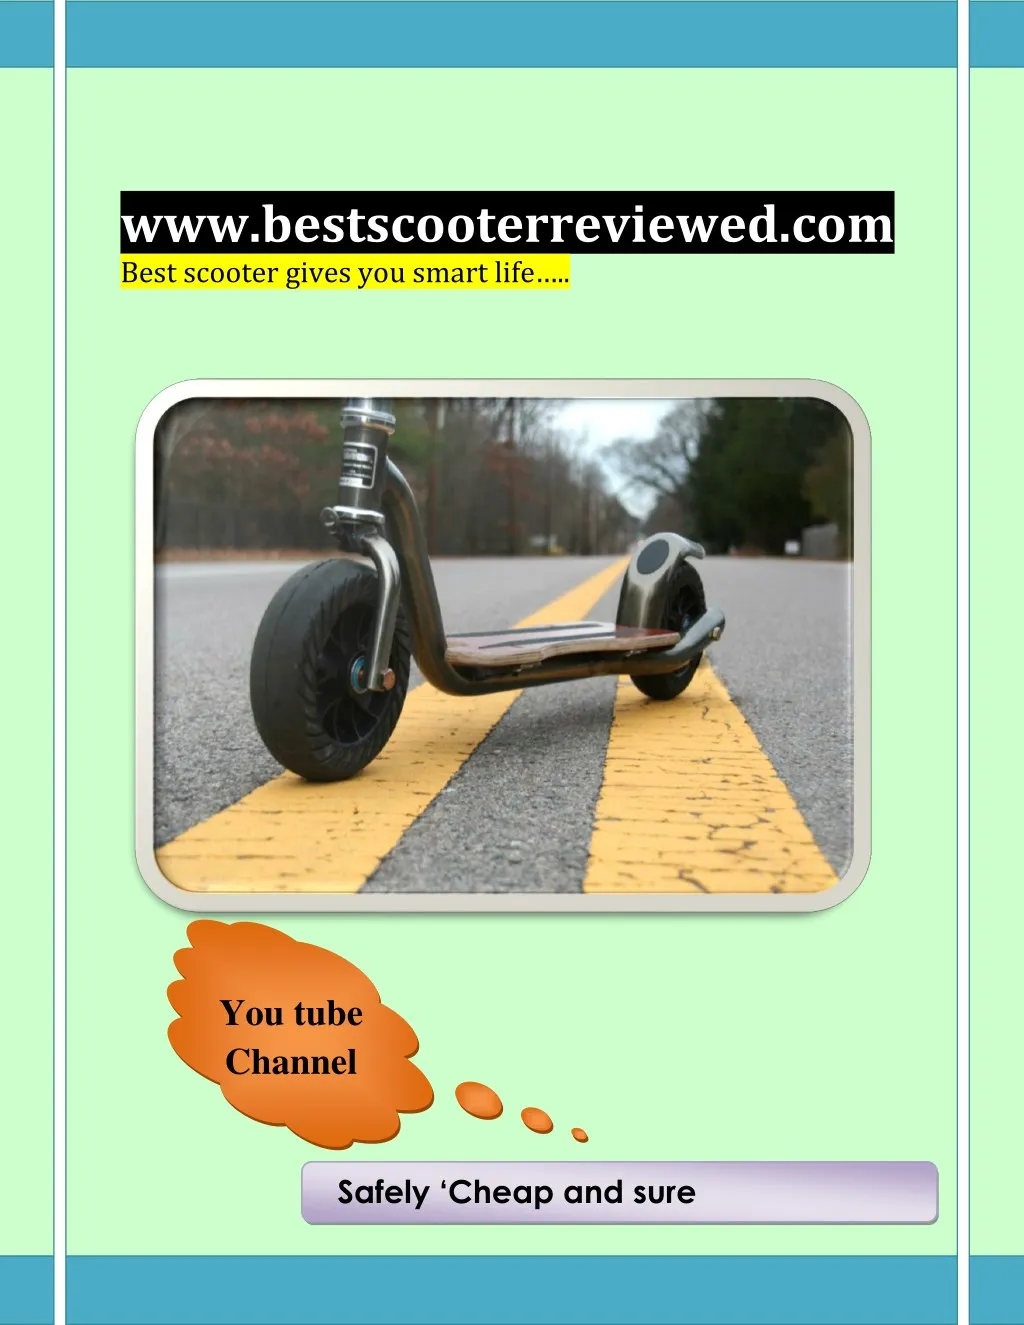 www bestscooterreviewed com best scooter gives n.